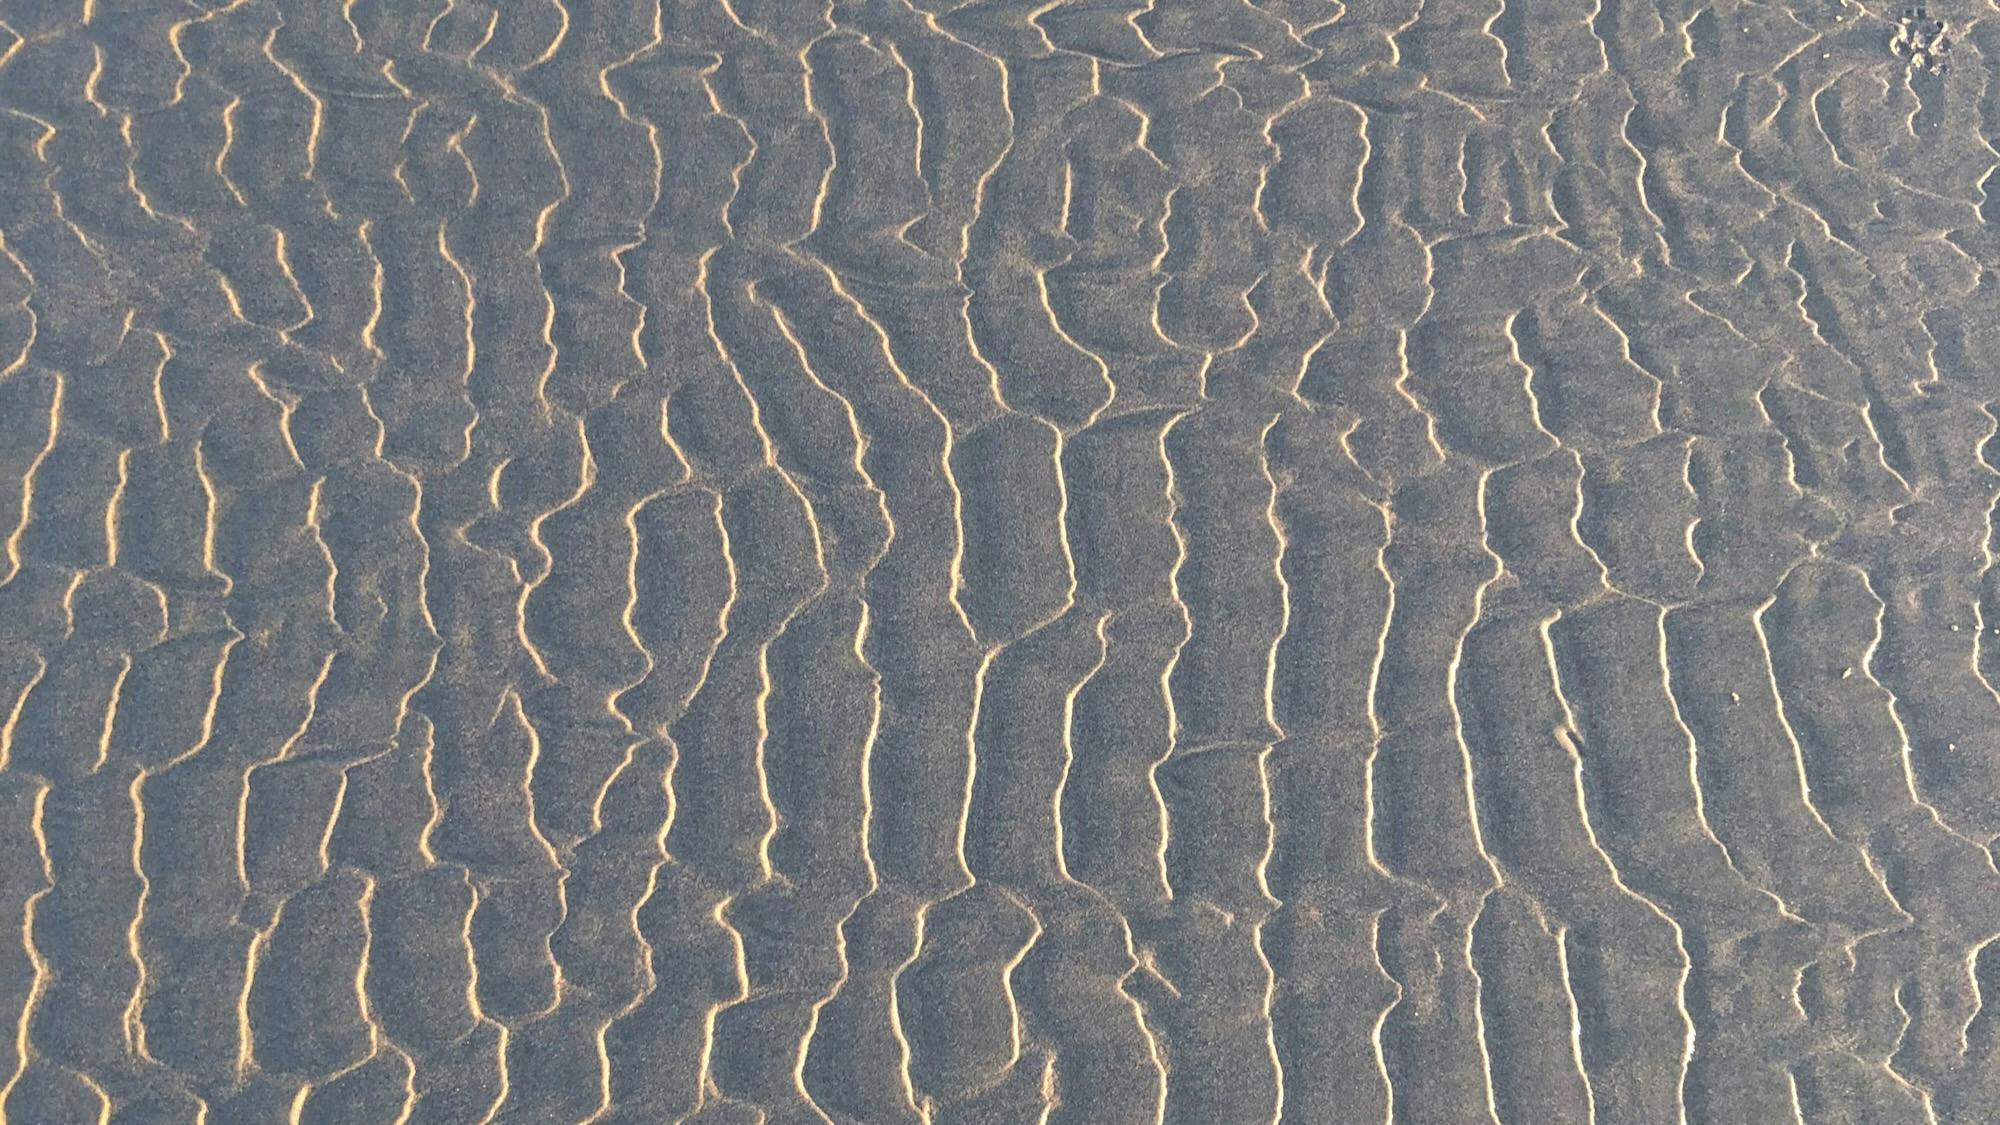 Beach sand rippled into a pattern by water.